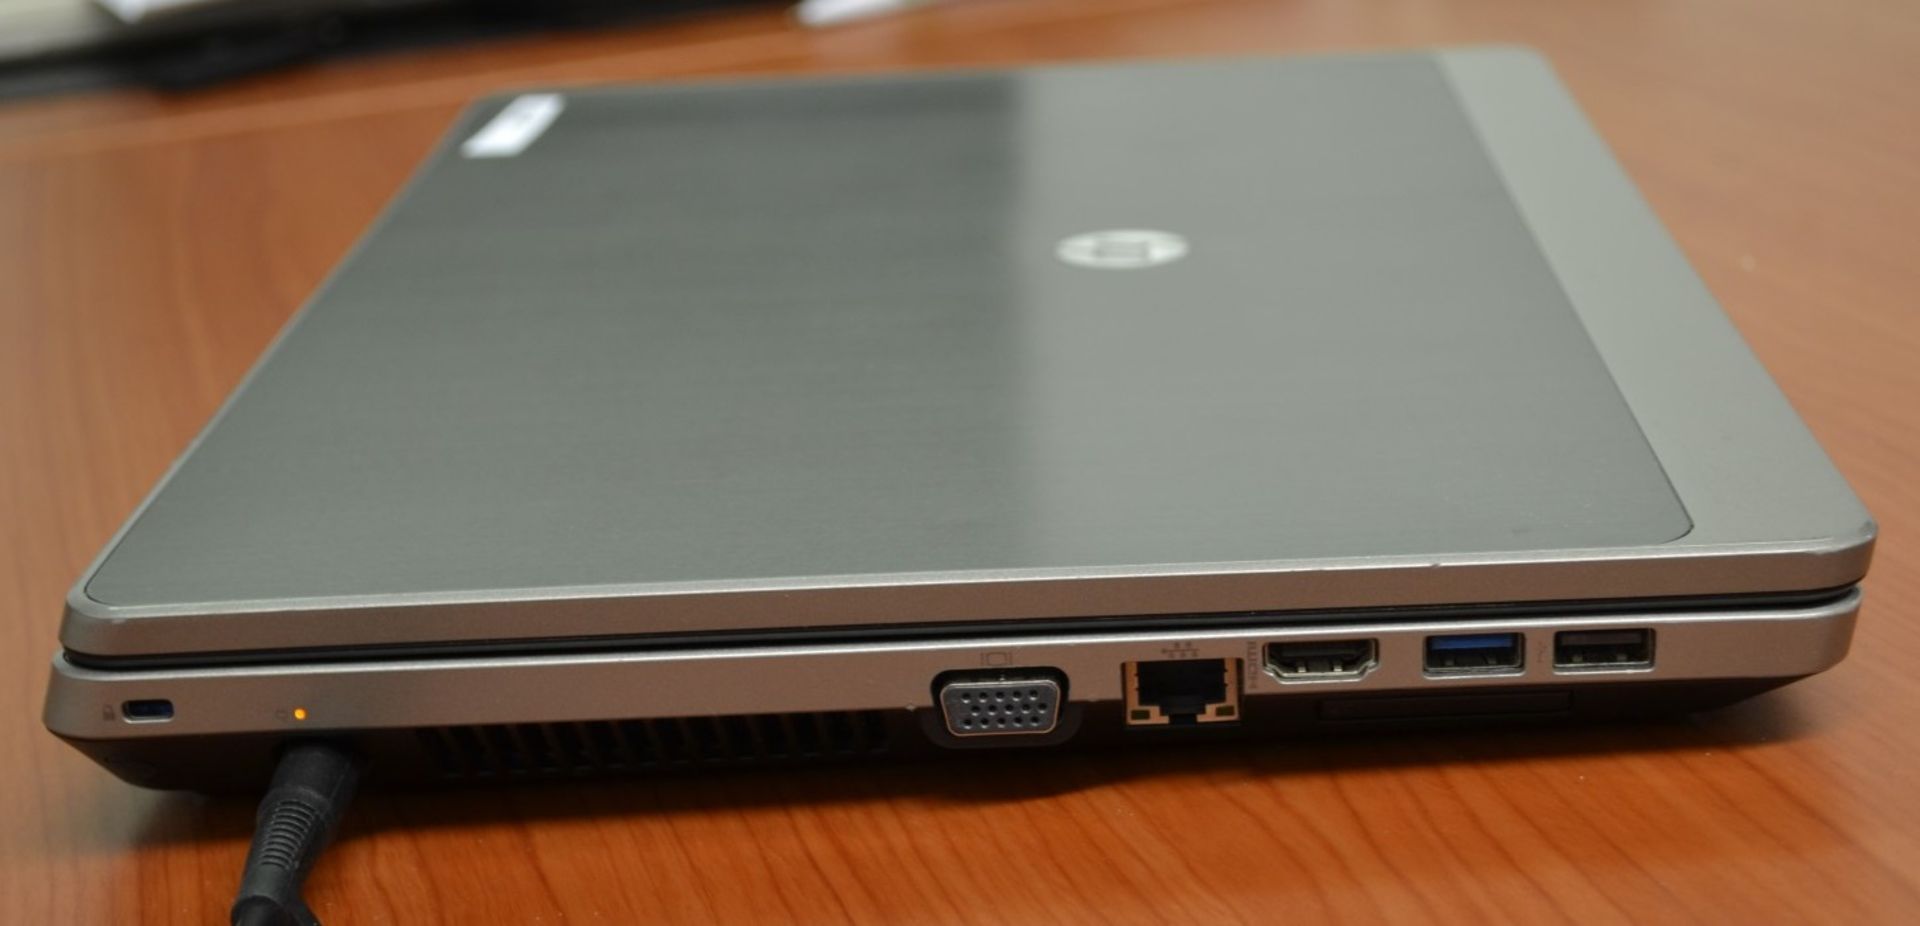 1 x HP Probook 4530s Laptop Computer - 15.6 Inch Screen Size - Features Intel Core i3-2350M Dual - Image 4 of 6